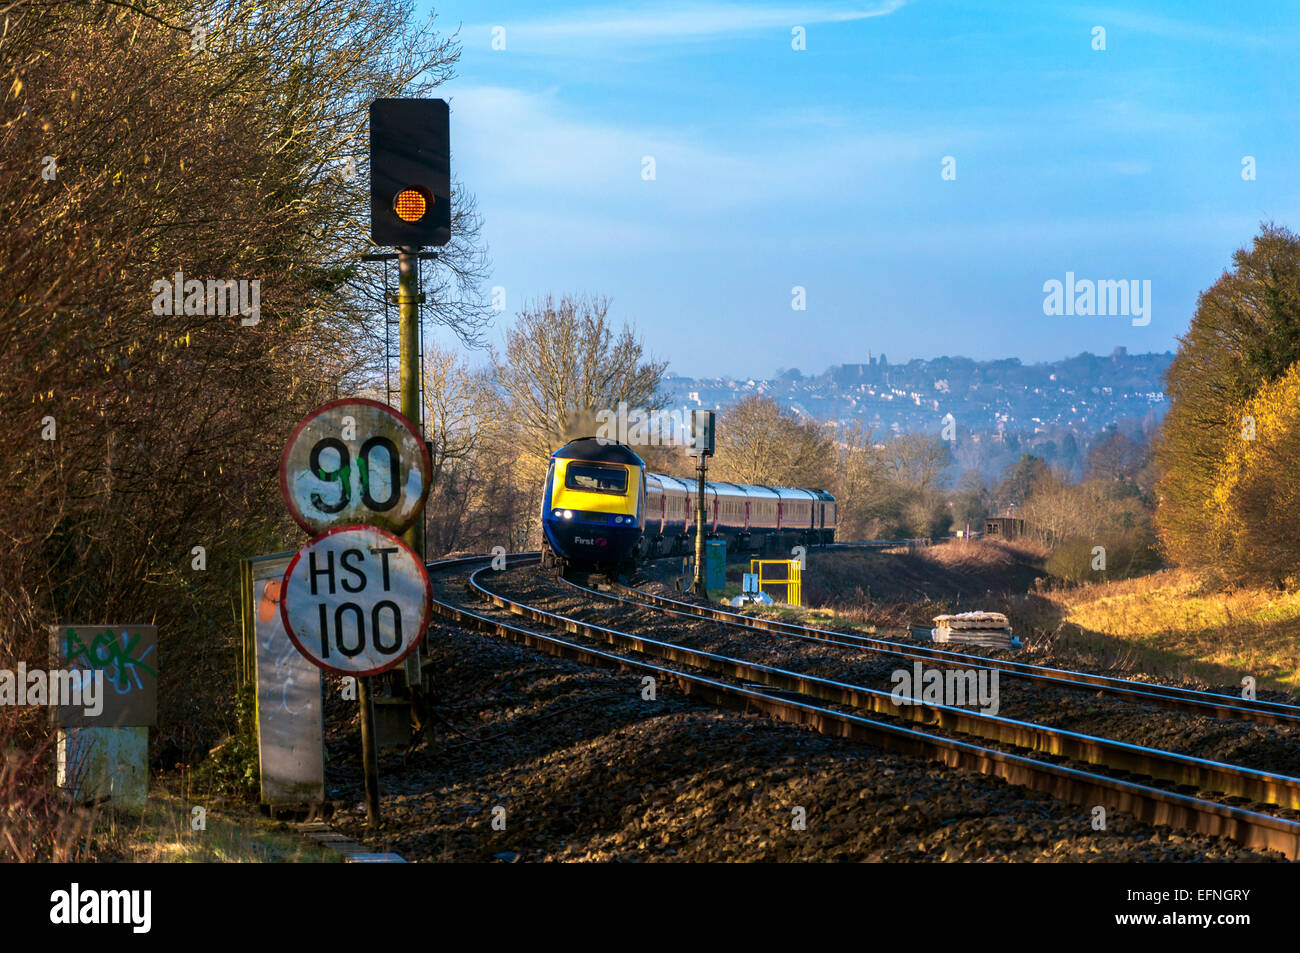 Season Ticket Train High Resolution Stock Photography and Images - Alamy